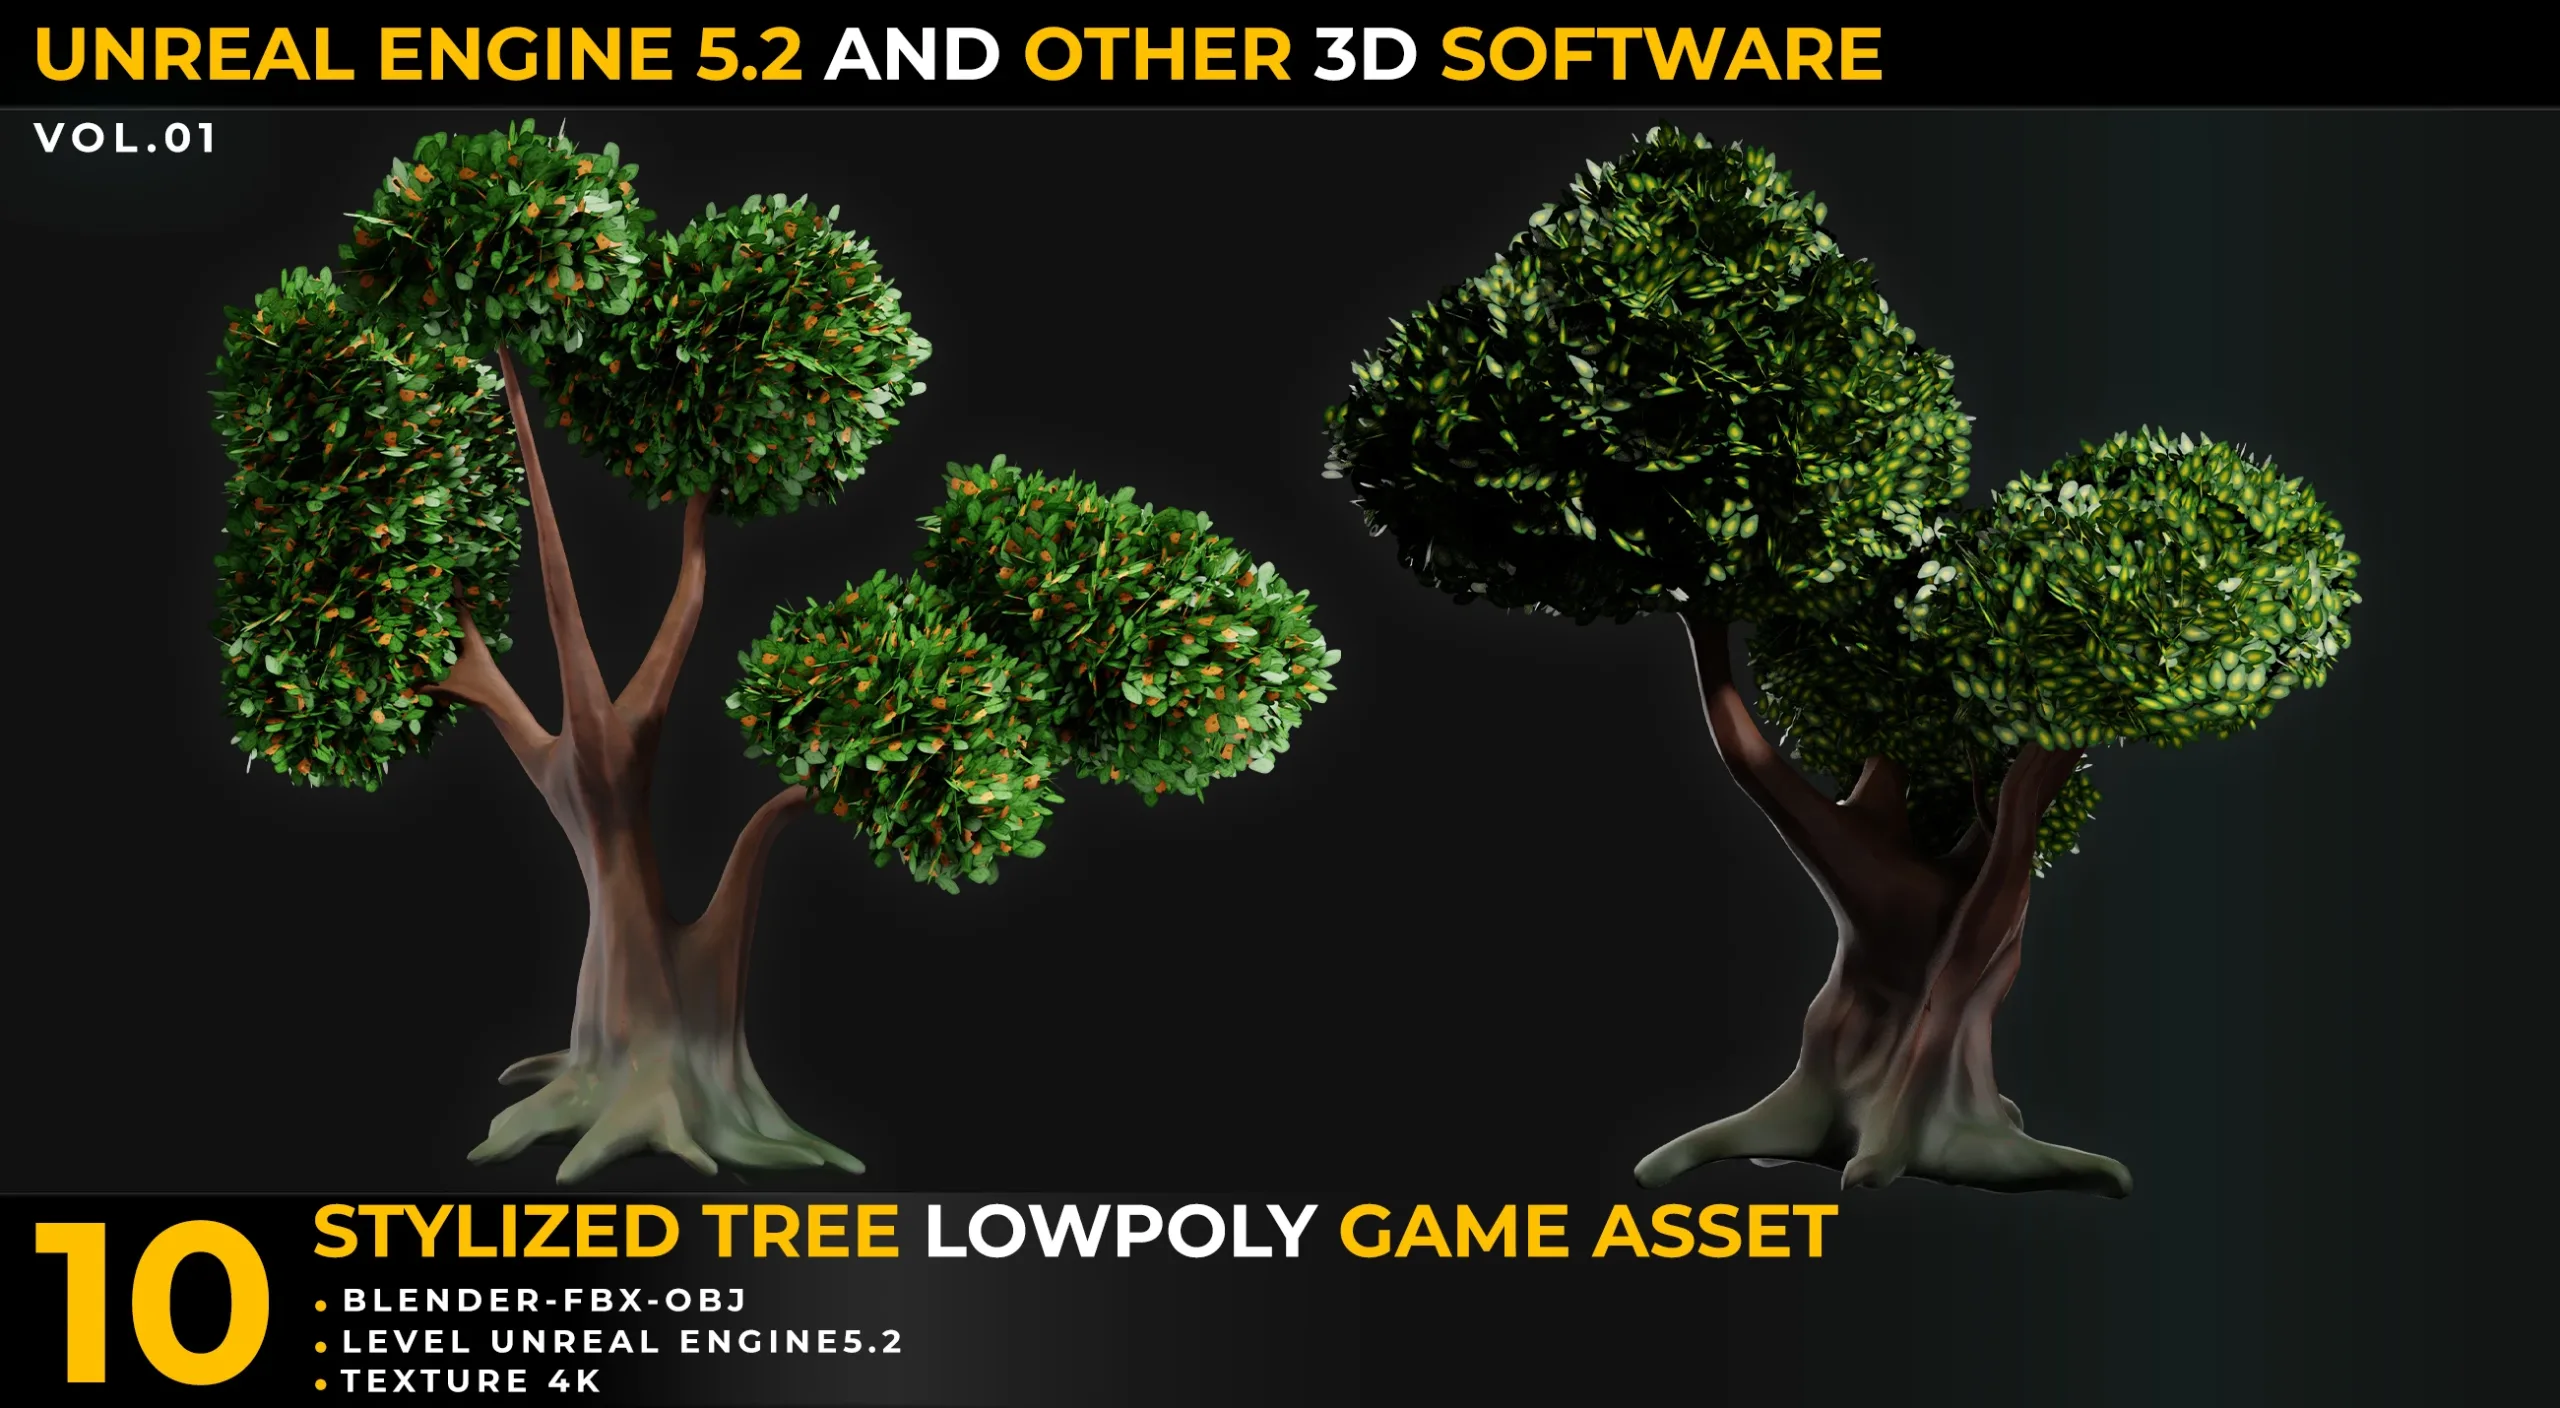 10 Tree Stylize LowPoly GameAsset For UnrealEngine5.2 And Other 3DSoftware